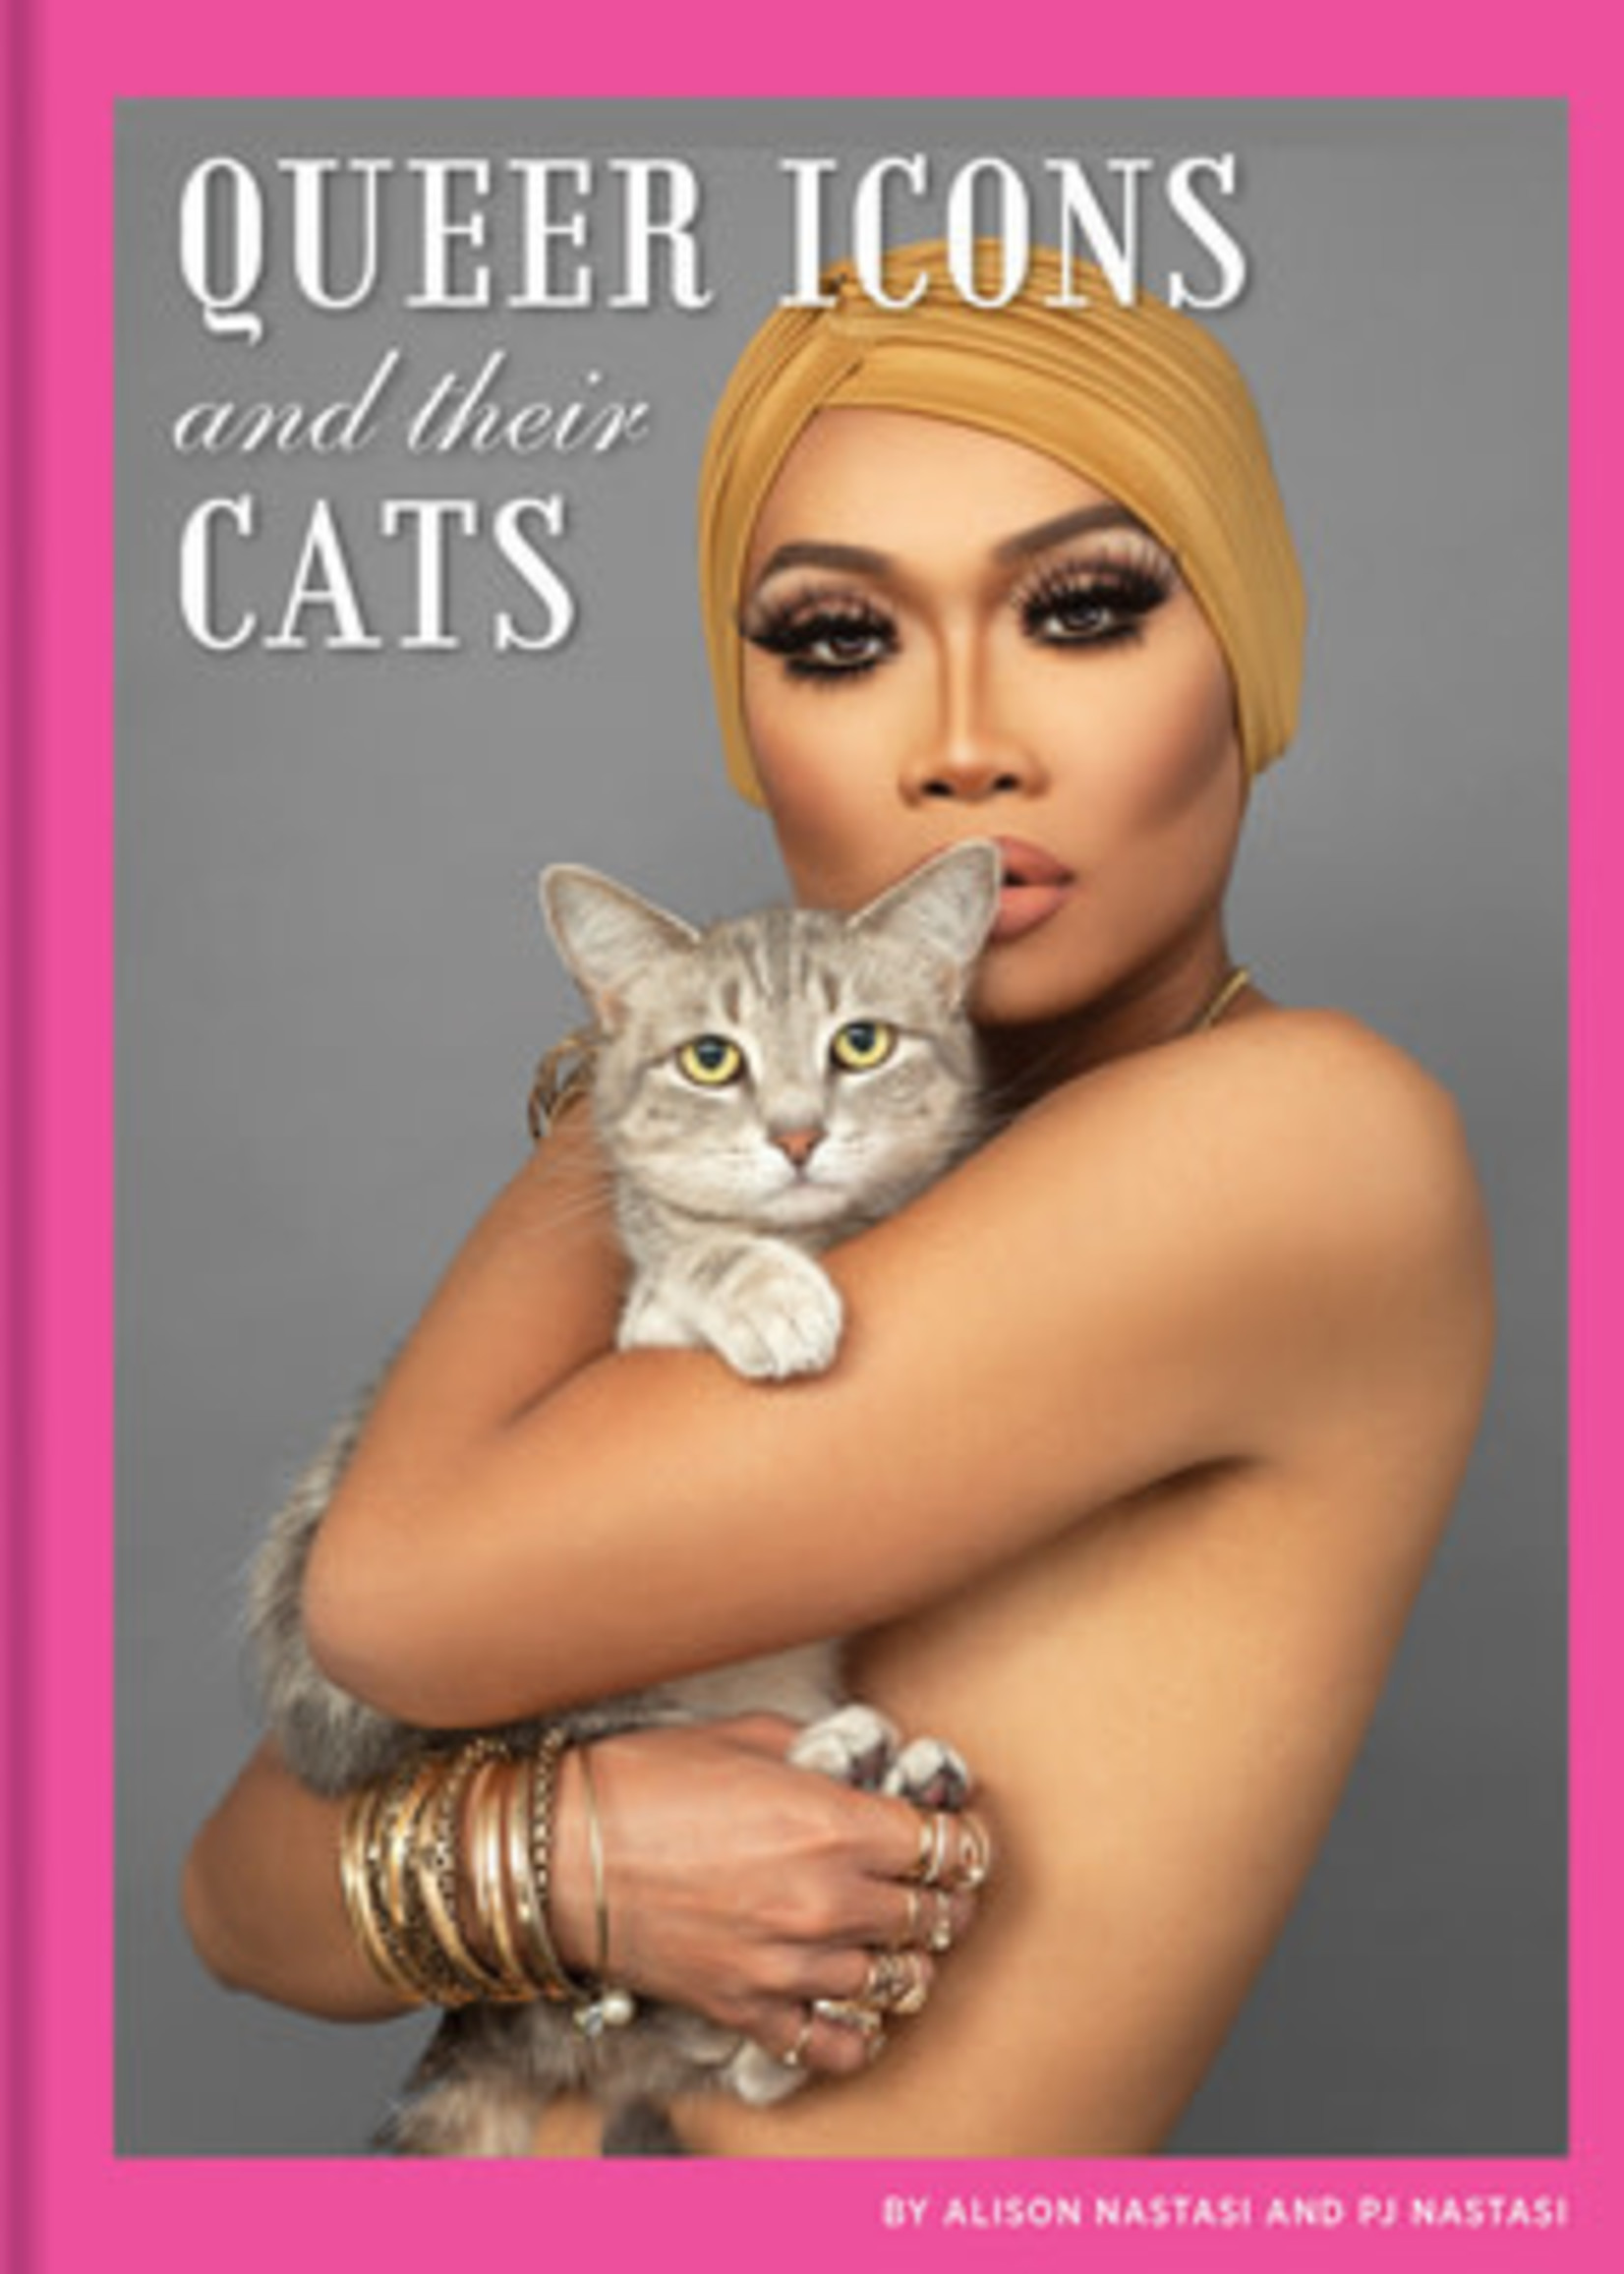 Queer Icons and Their Cats by Alison Nastasi,  P.J. Nastasi